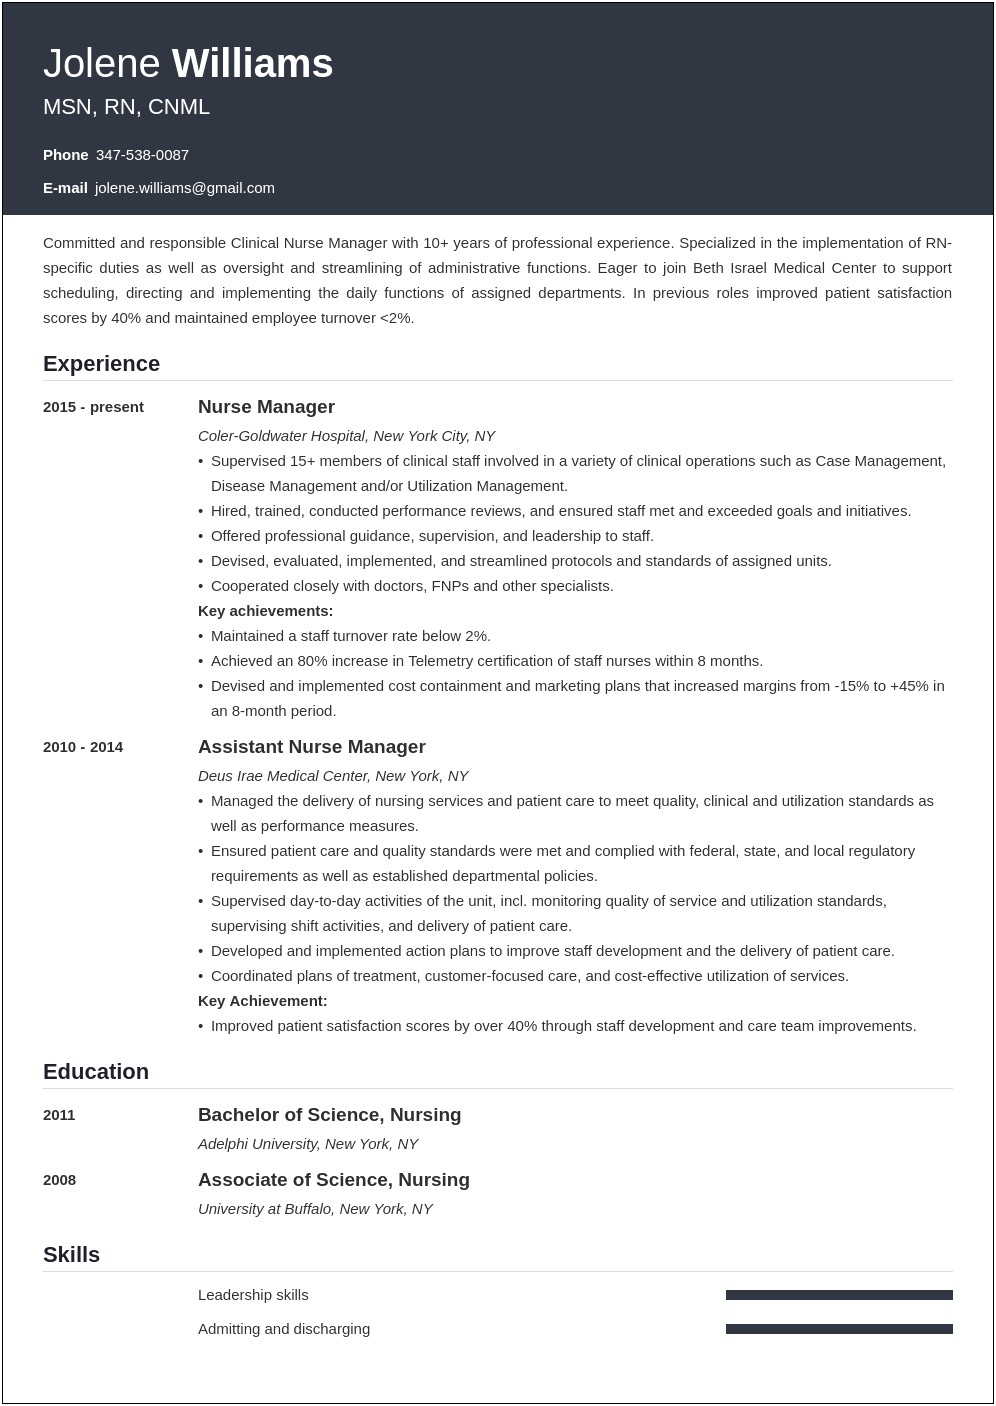 Resume Objective For Leadership Position